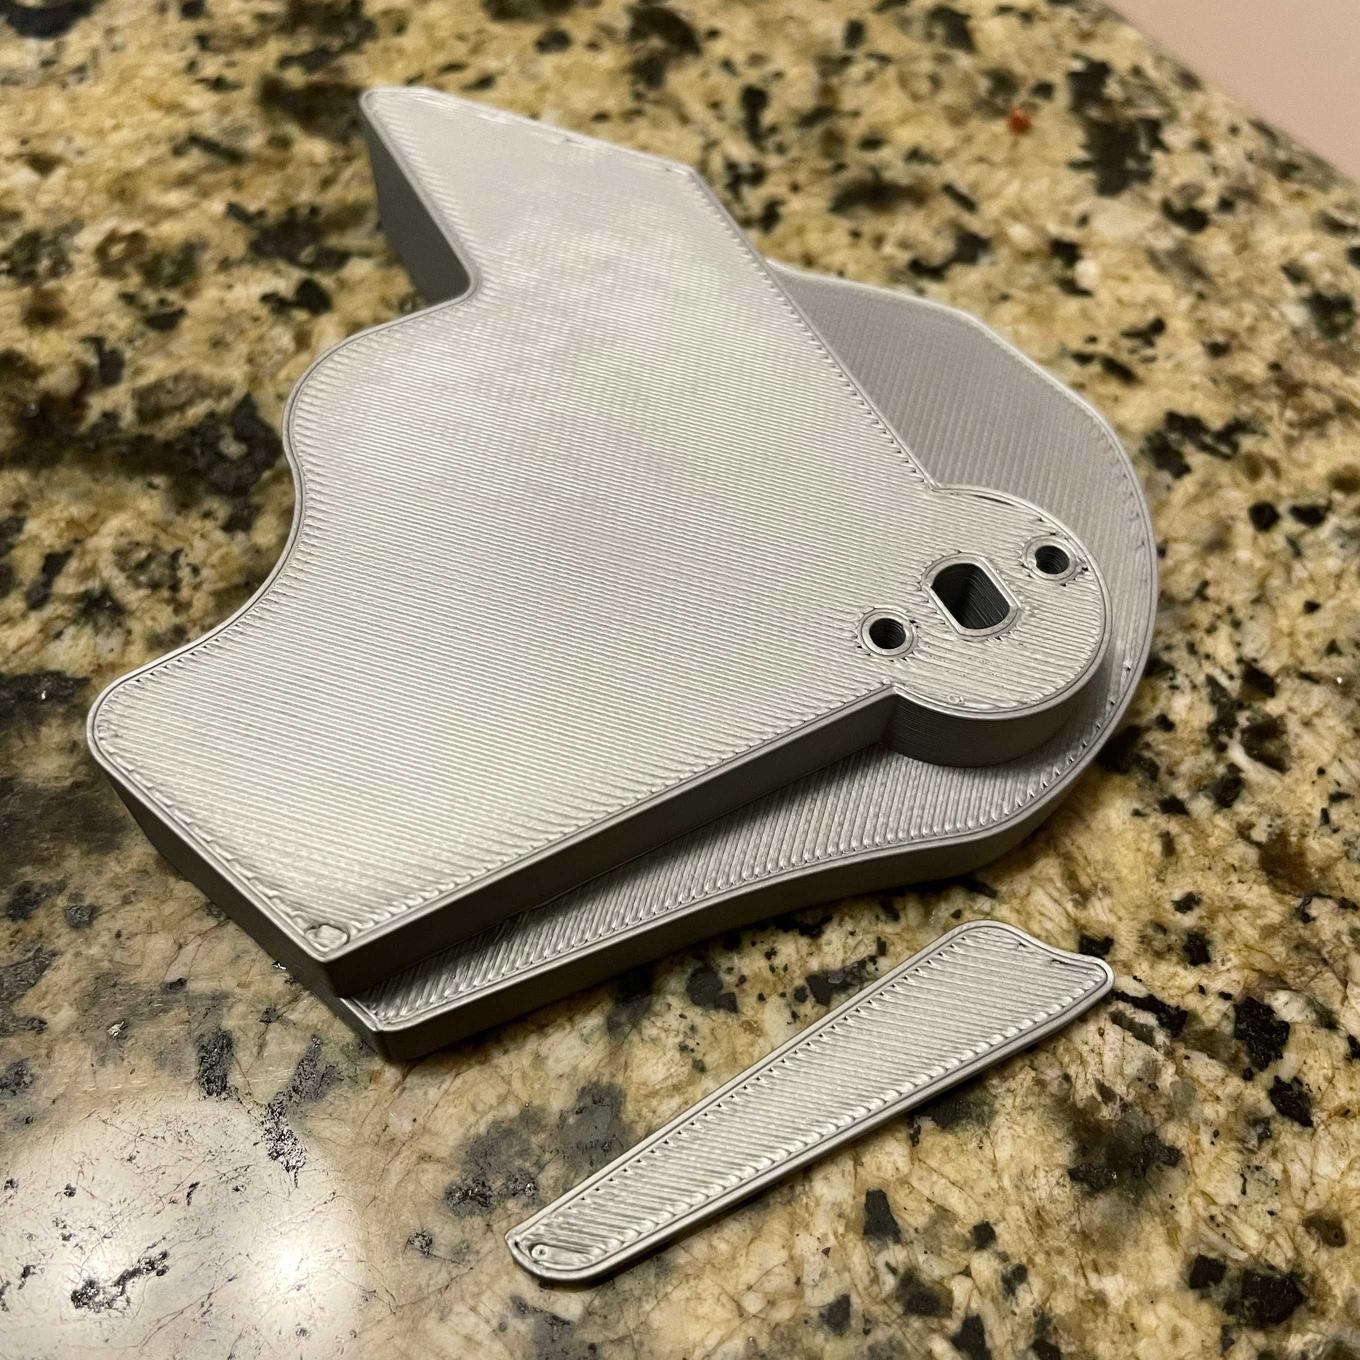 3D print of cat's head dial and jaw, with mount and cutout for movement